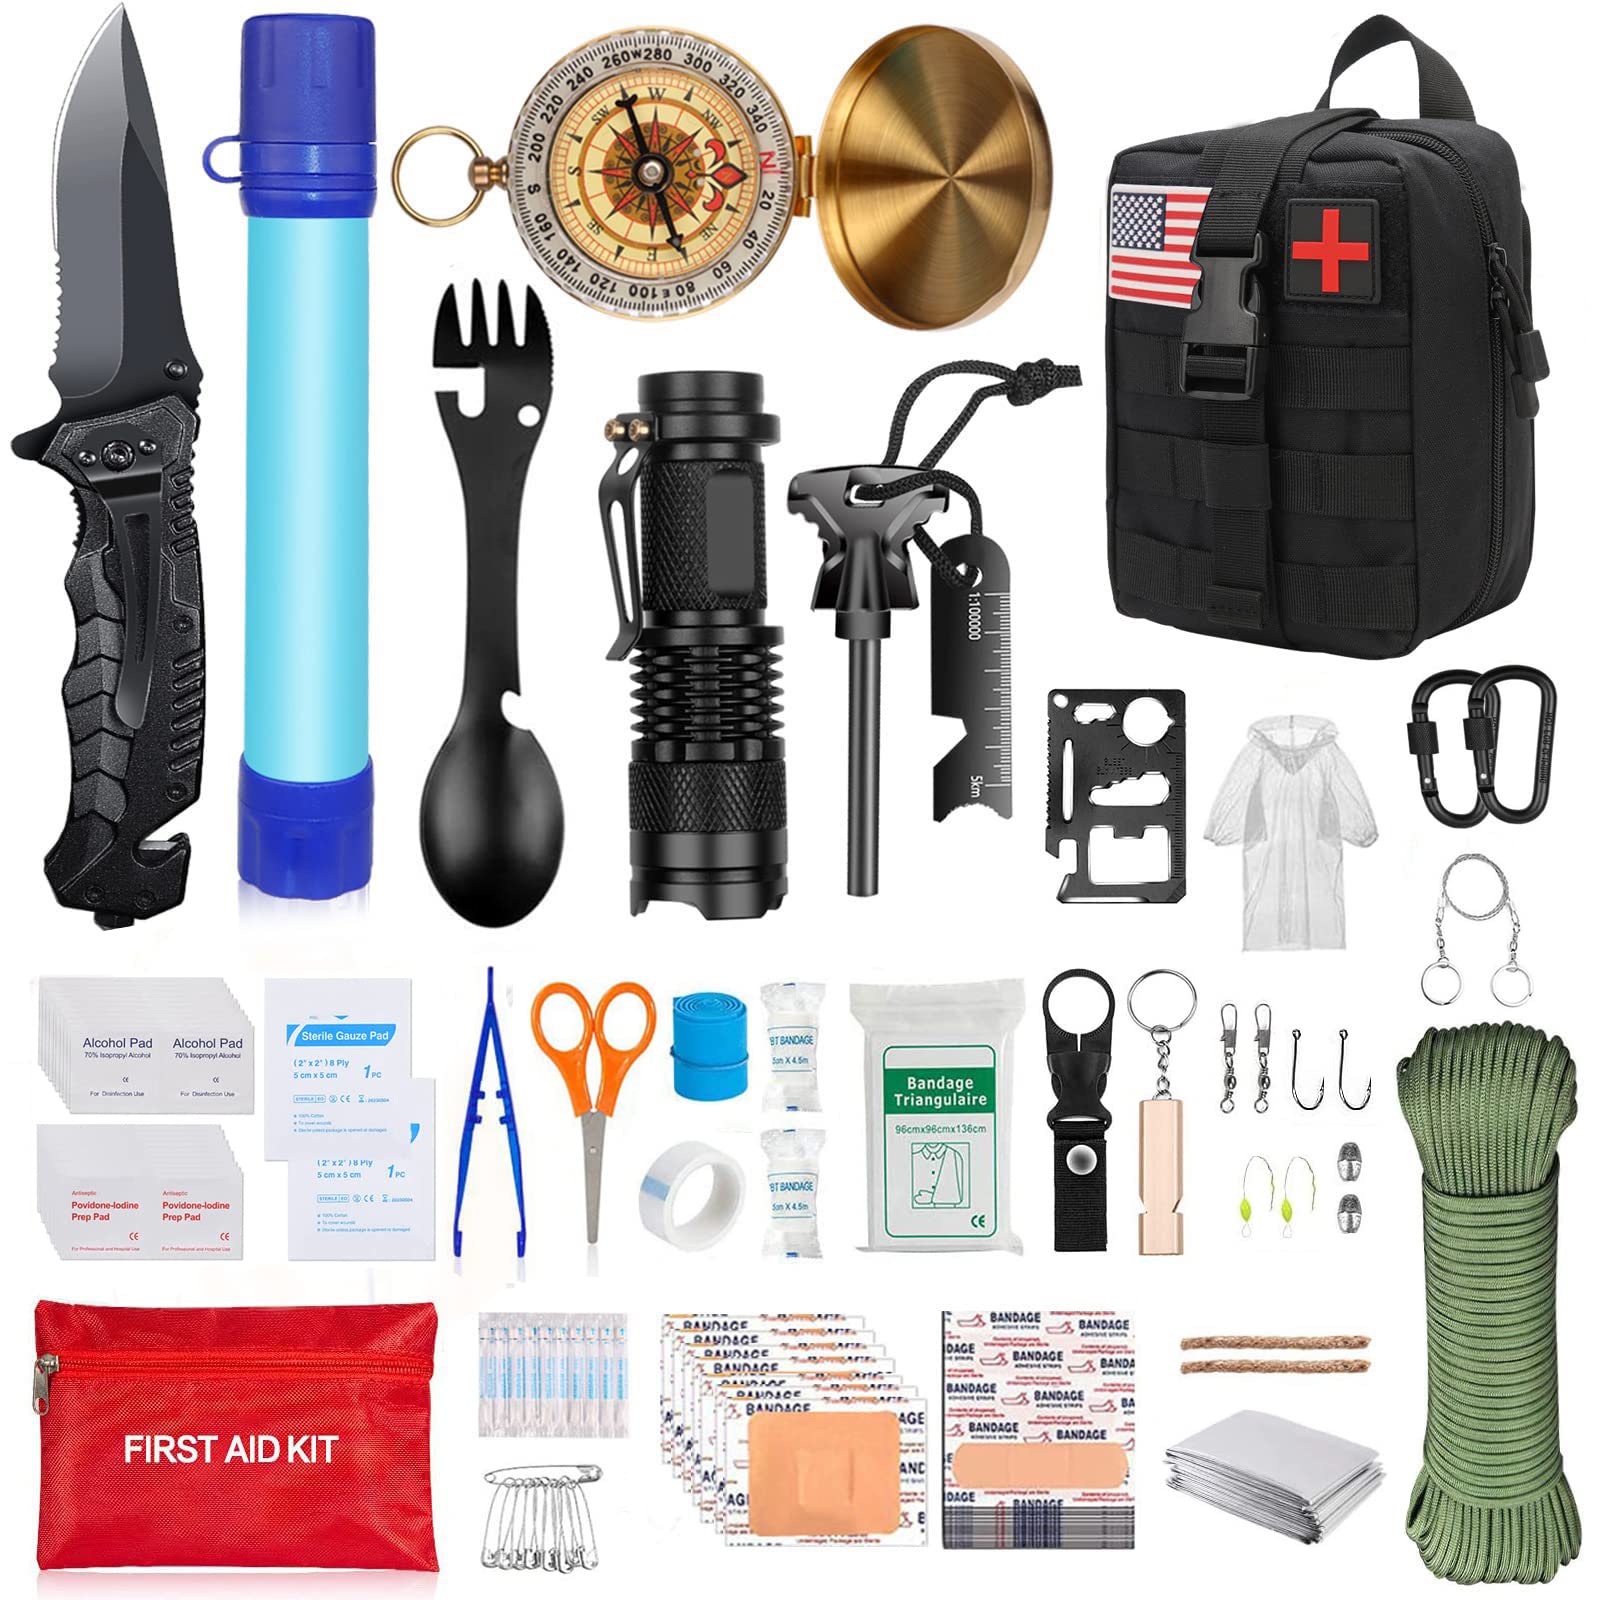 KEPEAK Gifts for Men Dad Husband Him, Survival Kits, Survival Gear and  Equipment for Camping, Emergency, Hiking, Outdoor, Wilderness and Disaster